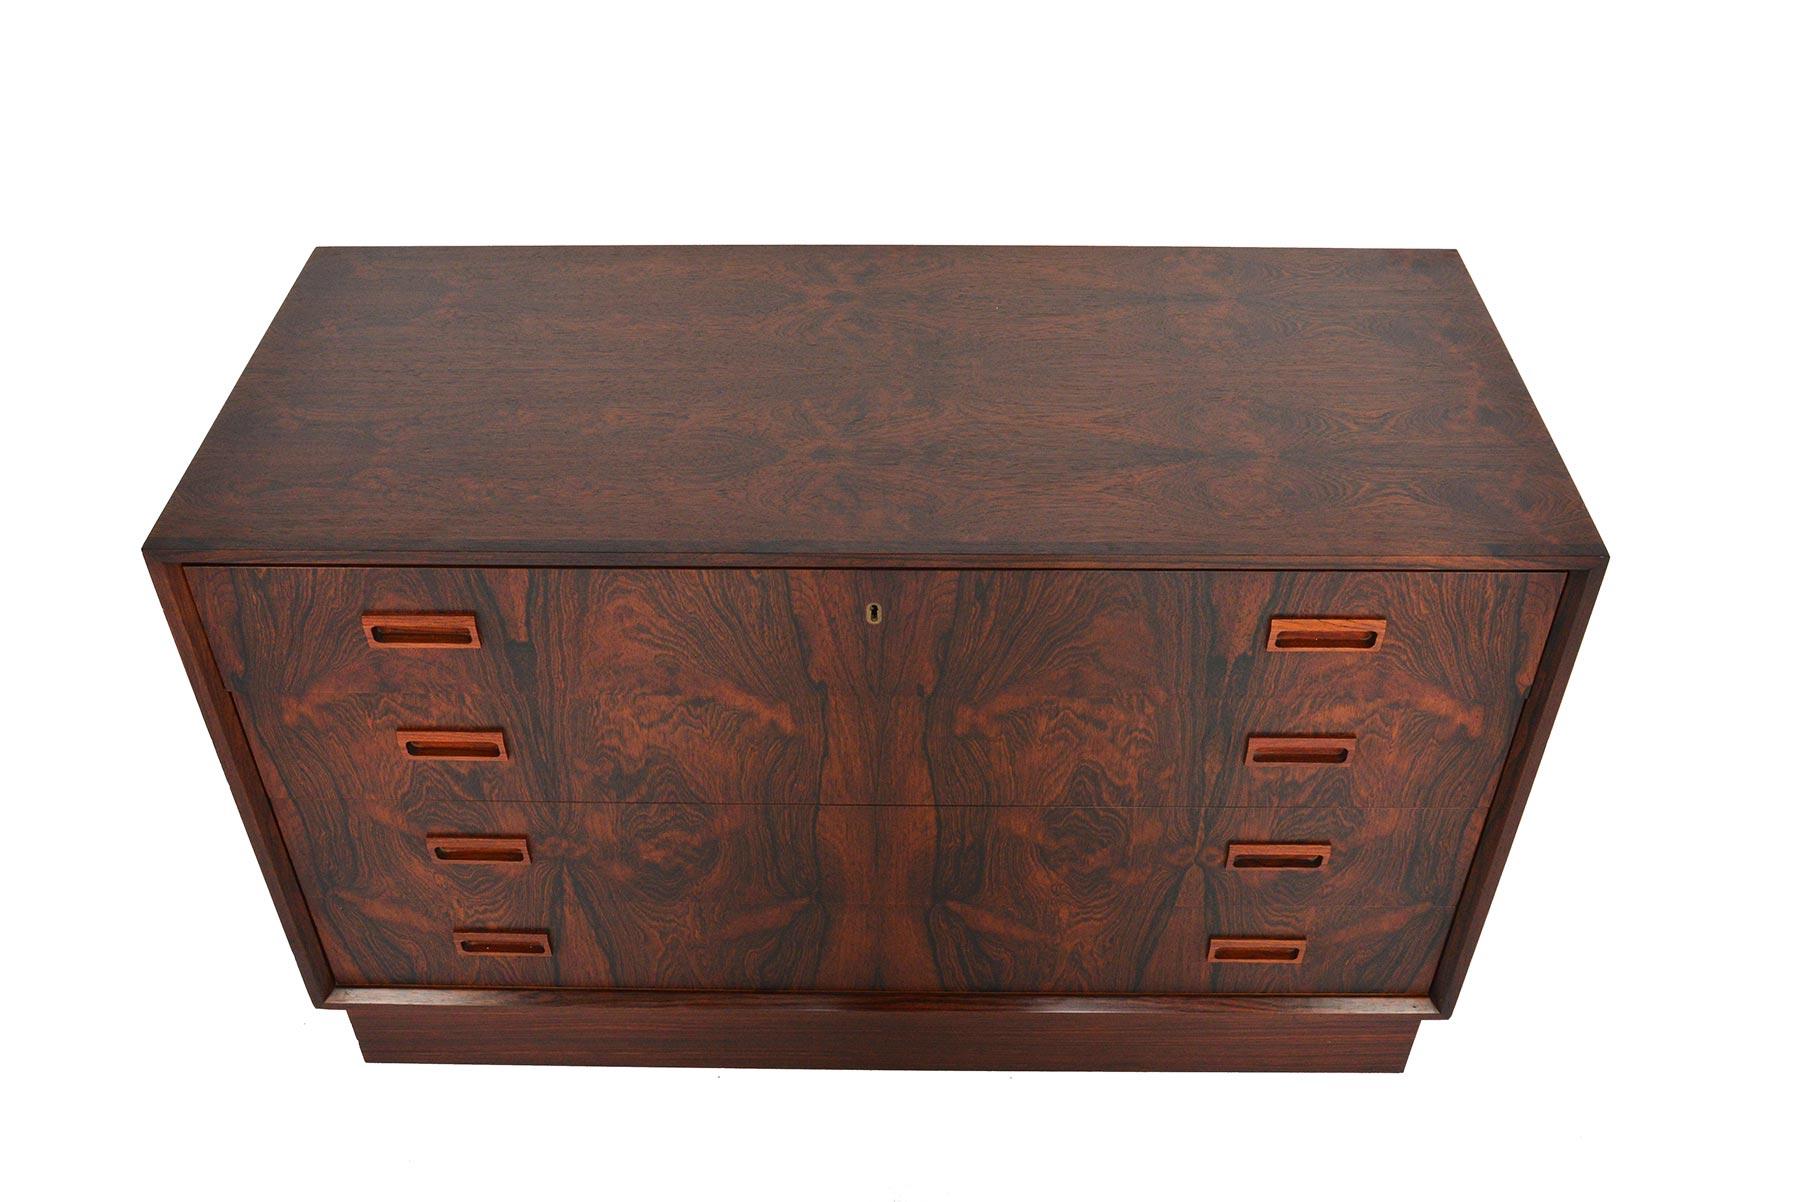 The most striking quality of this low four-drawer Danish modern gentleman’s chest is the vivid and figurative grain of Brazilian rosewood. Housed in an inset mitered case, four drawers offer exceptional storage. The case stands on its original